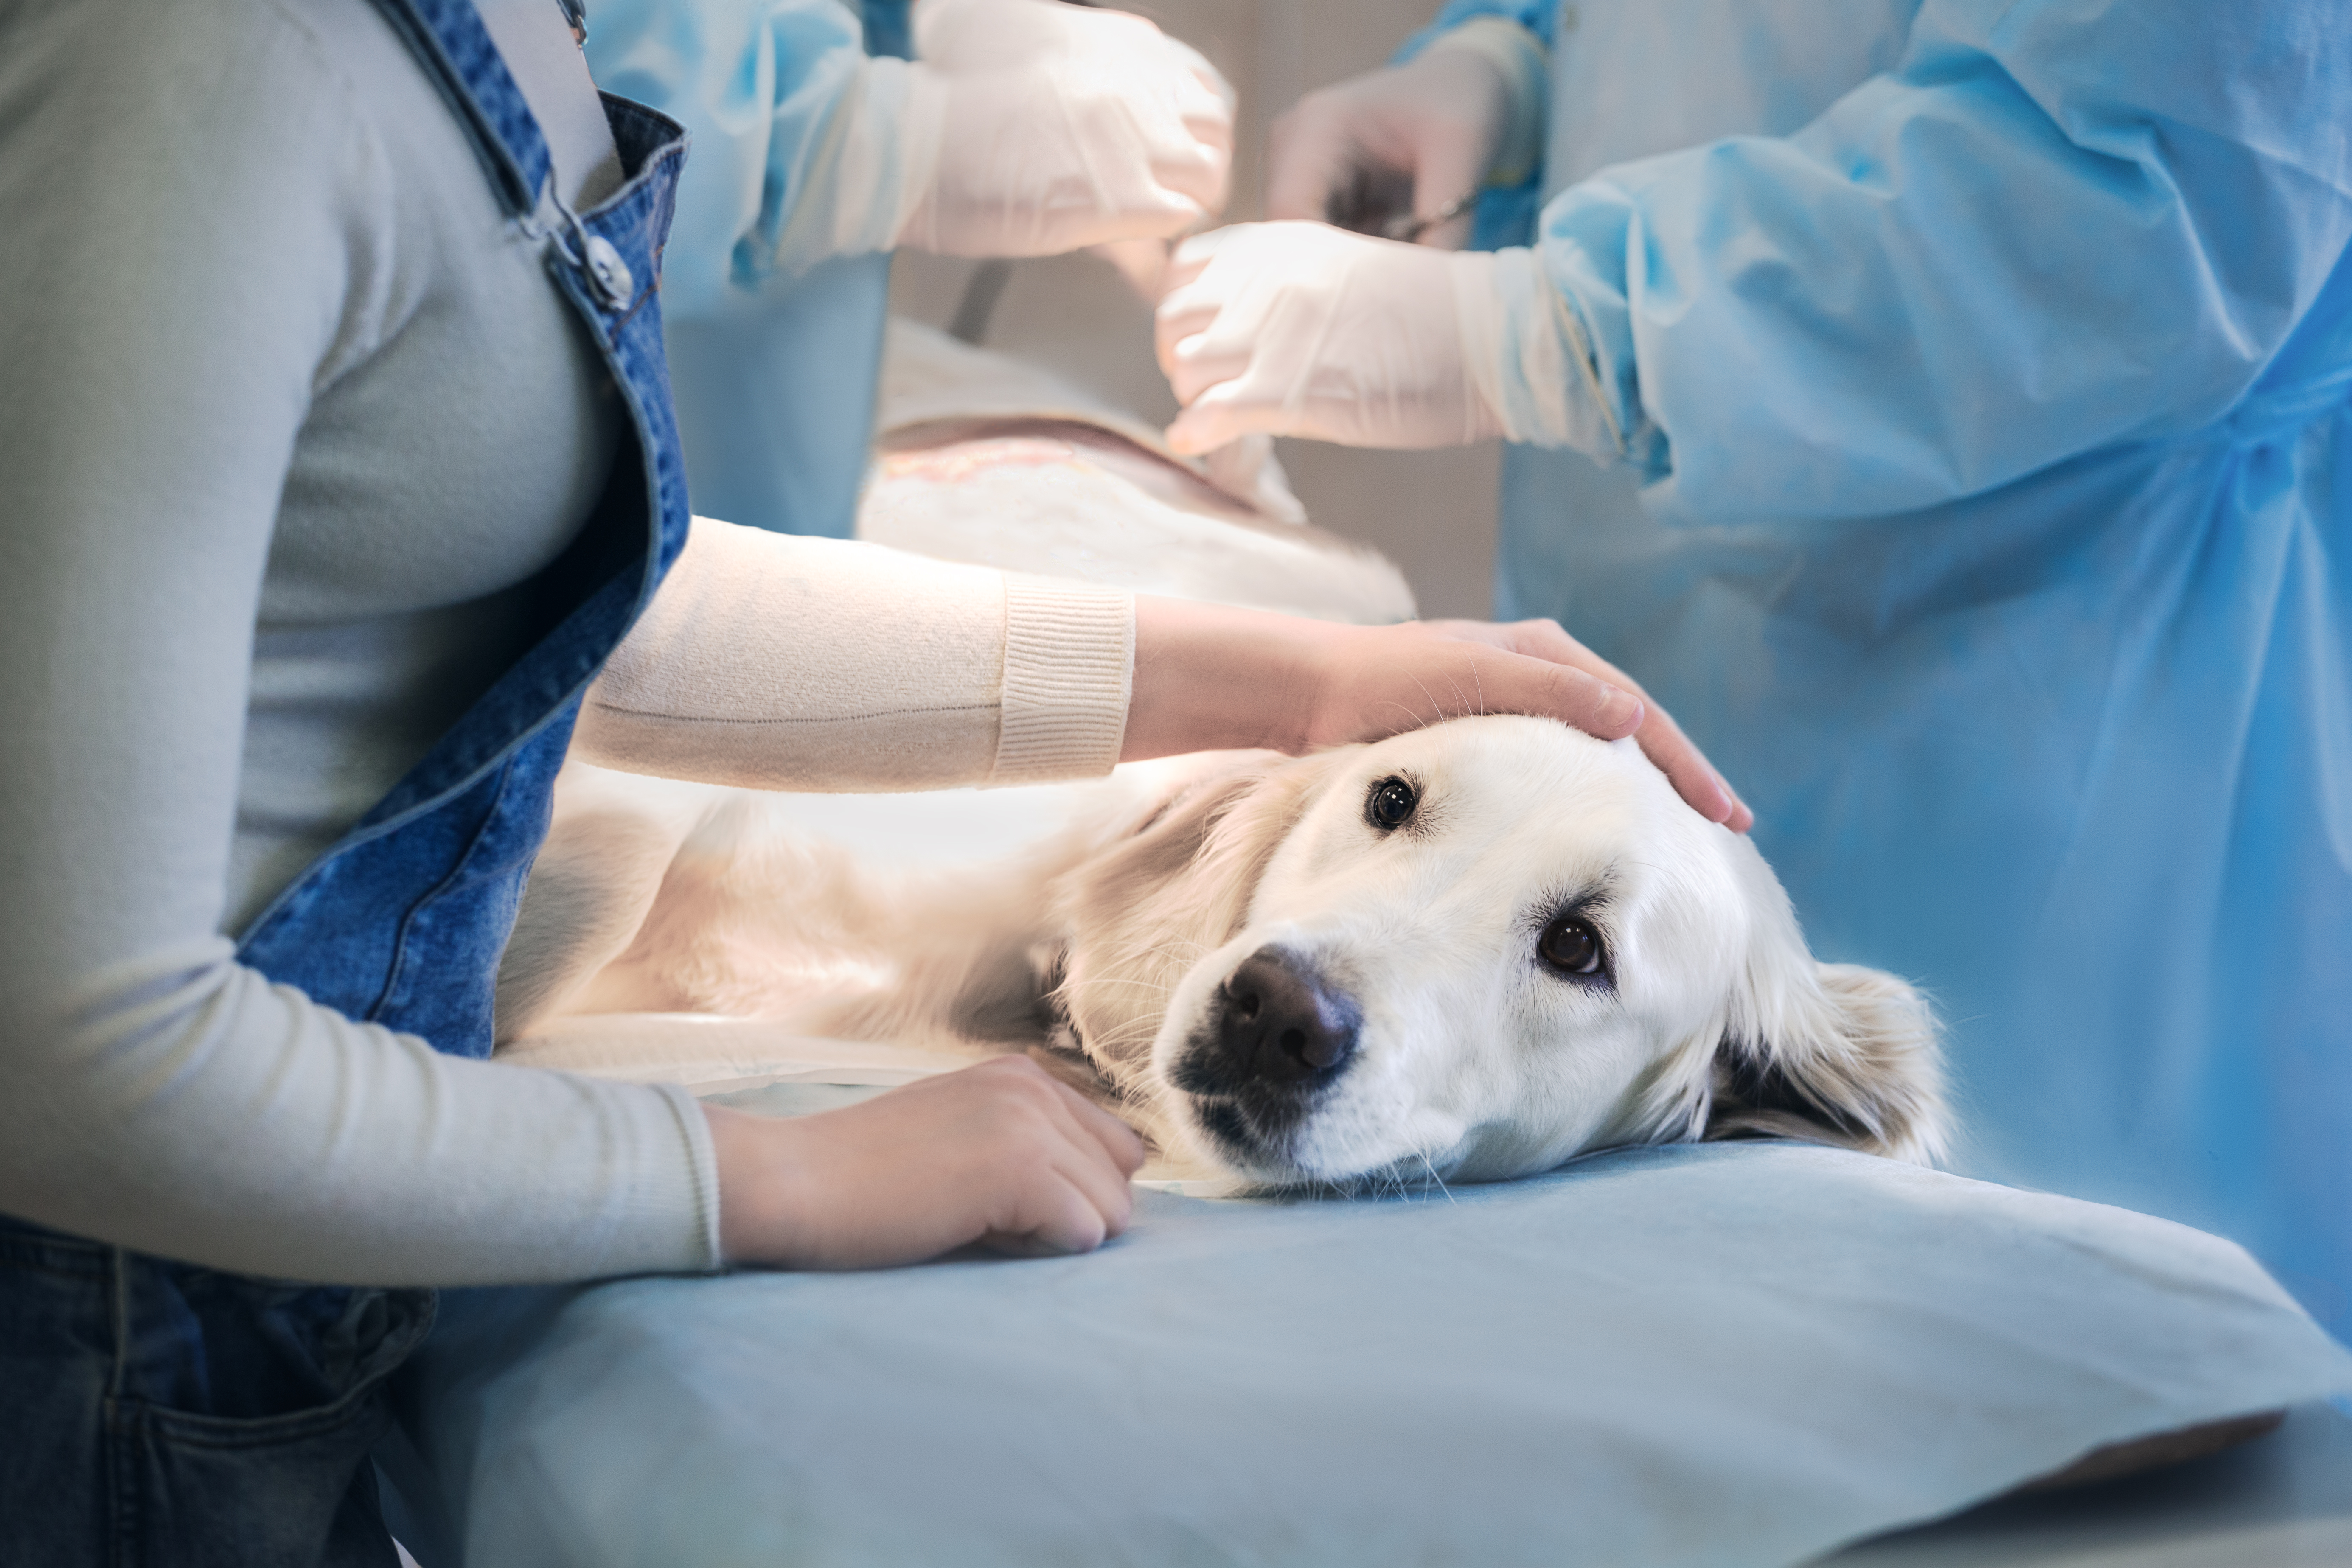 Ill golden retriever on operating table in veterinarian's clinic